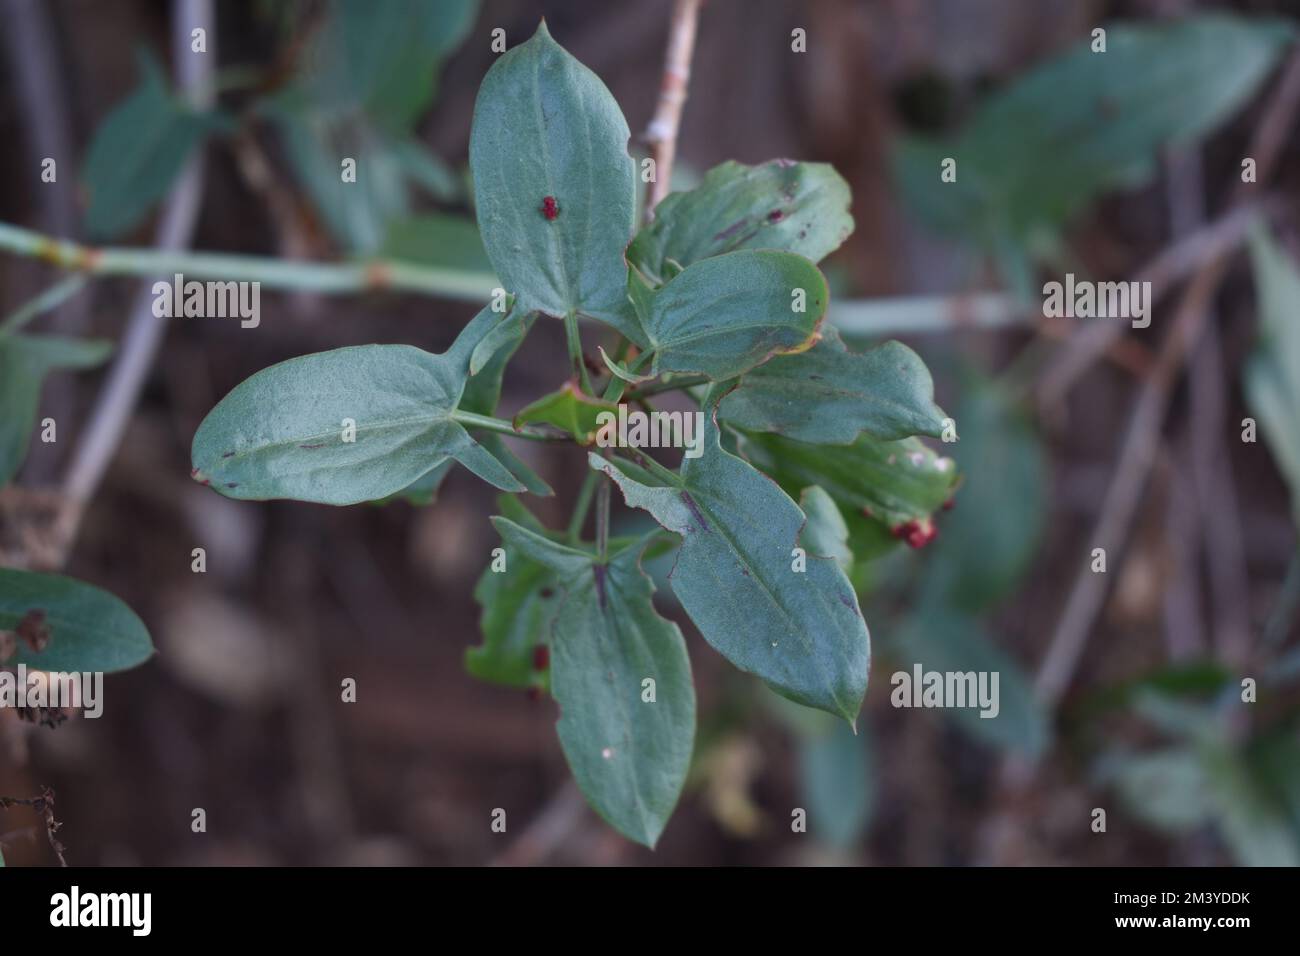 A close-up shot of a common smilax on a soft blurry background Stock Photo